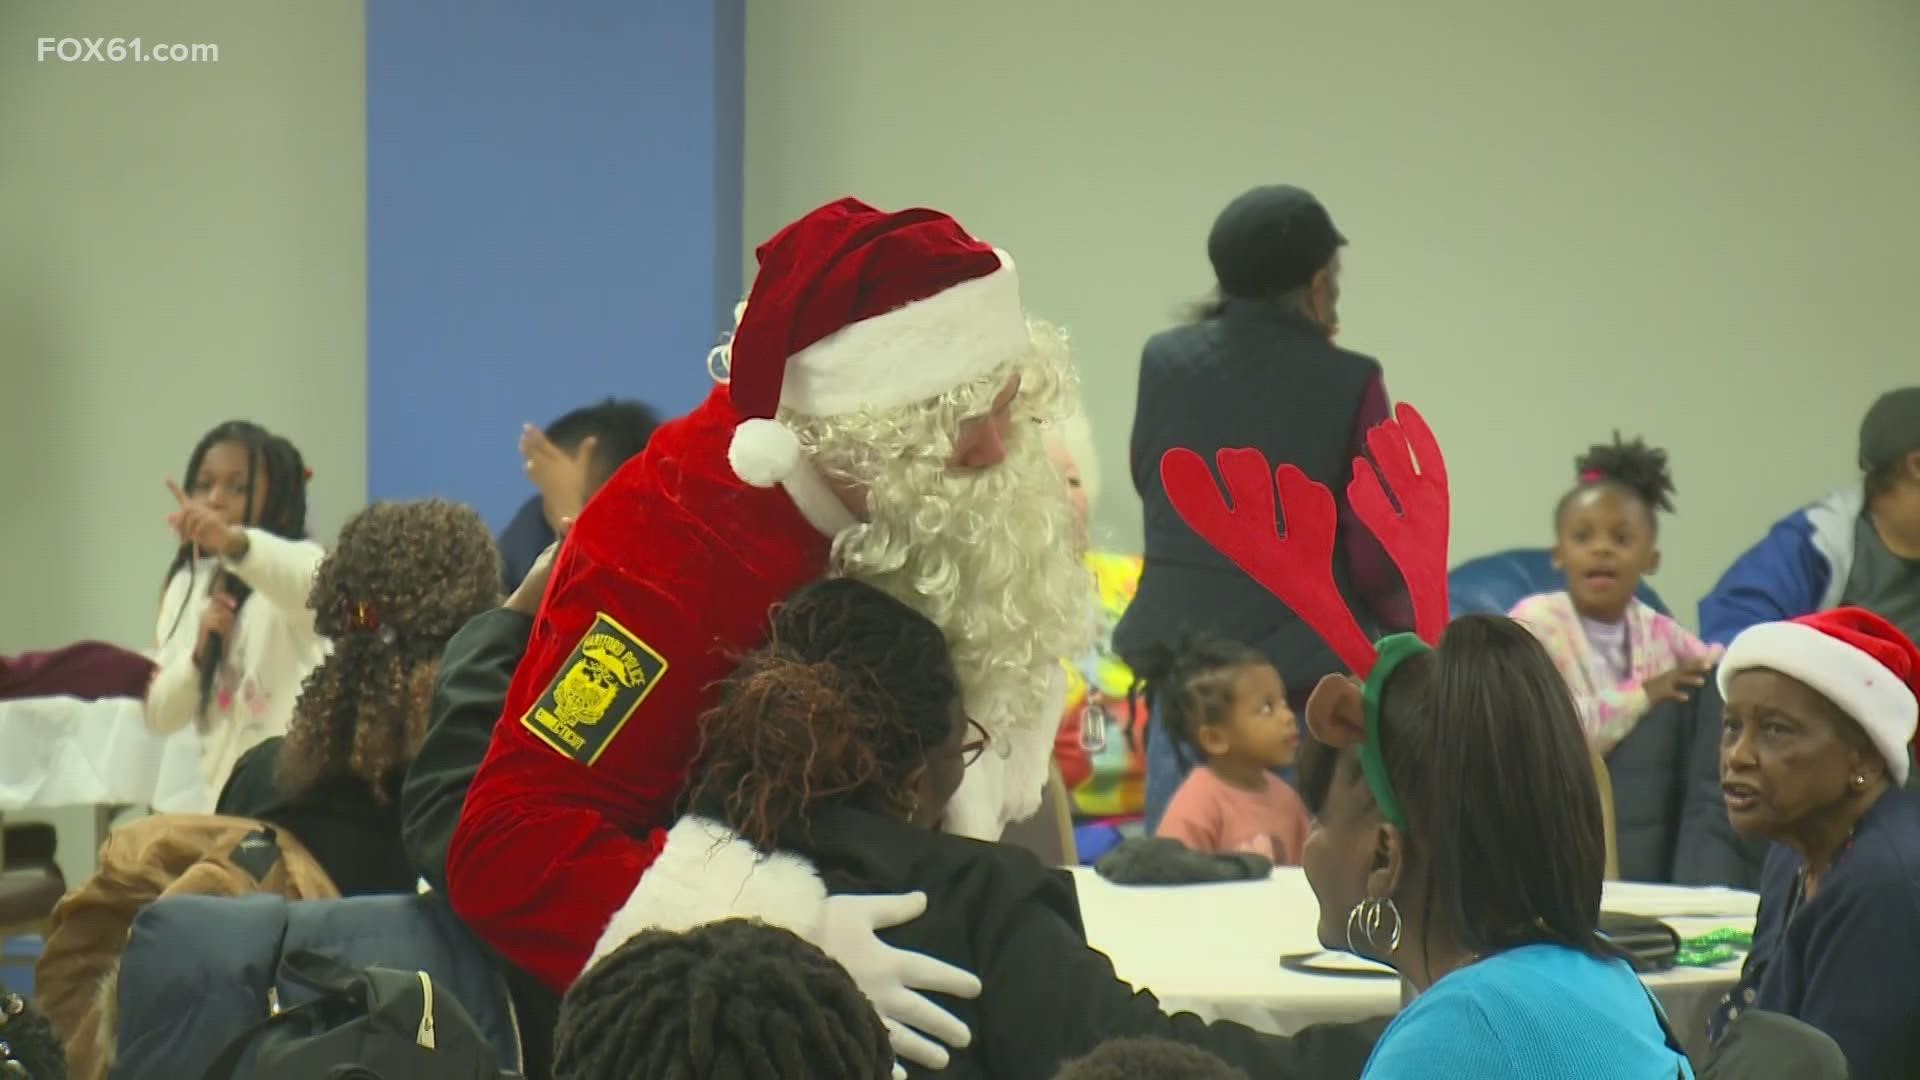 A celebration with dinner, presents and even getting to see Santa. The goal was to show support for families impacted by gun violence during what can be a difficult